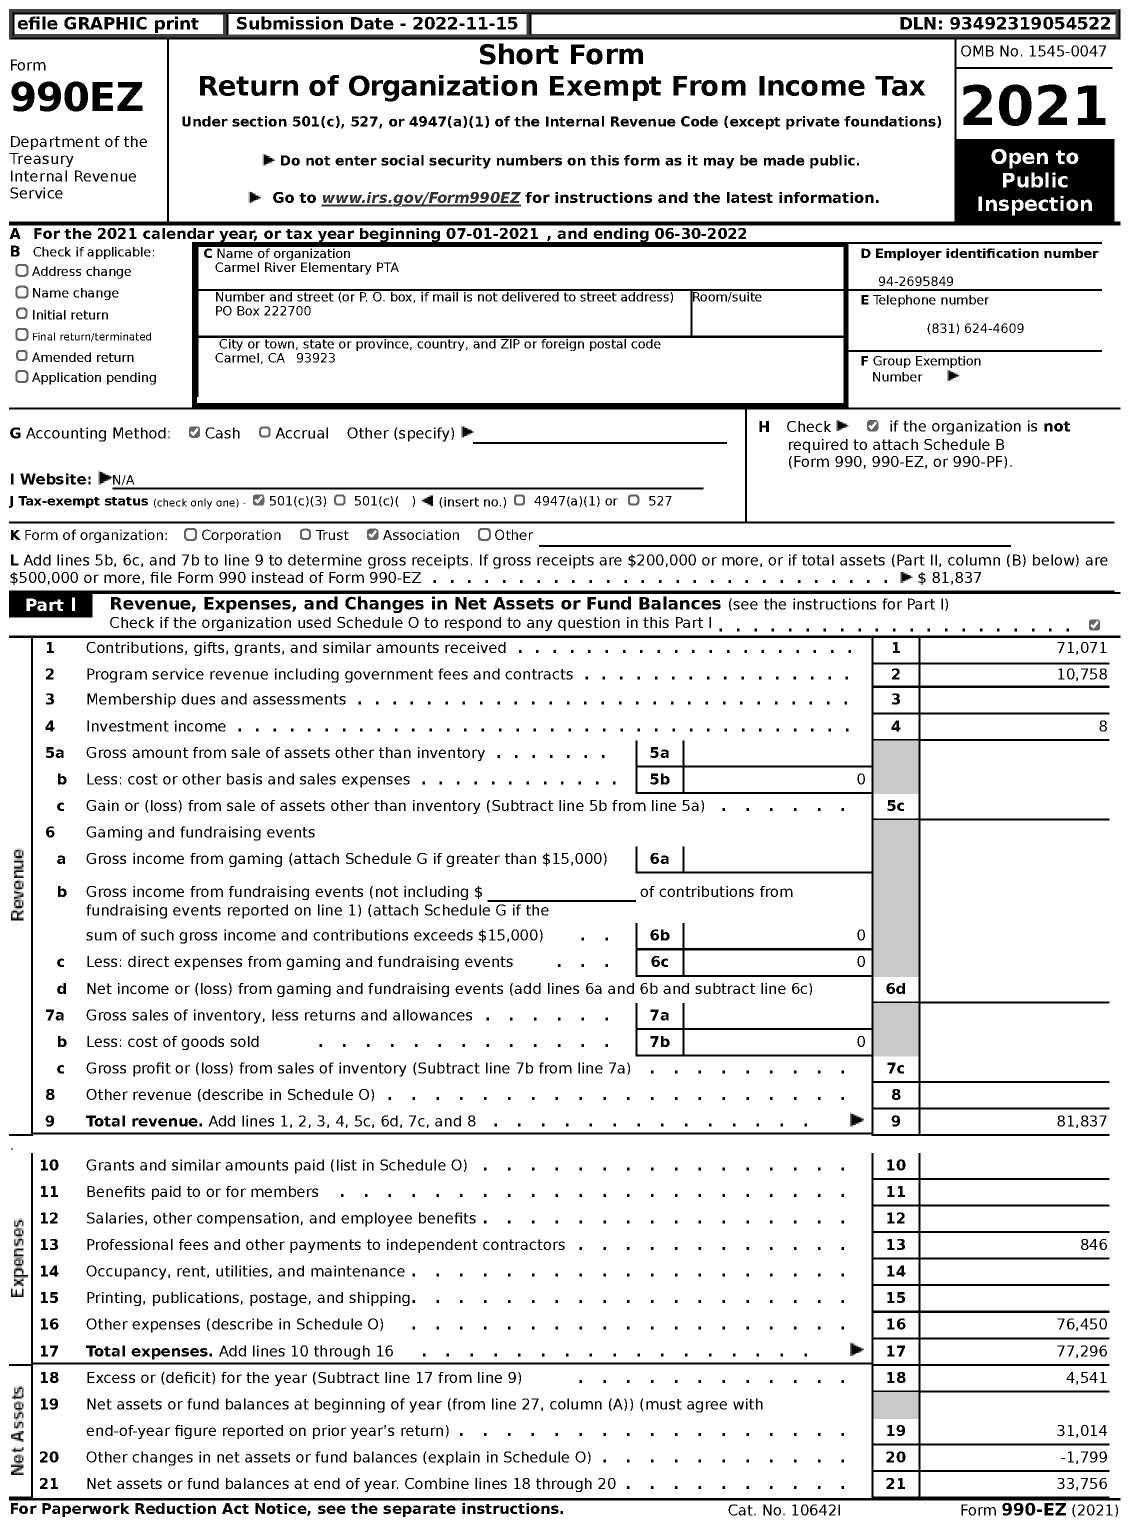 Image of first page of 2021 Form 990EZ for CALIFORNIA State PTA - Carmel River Elementary PTA